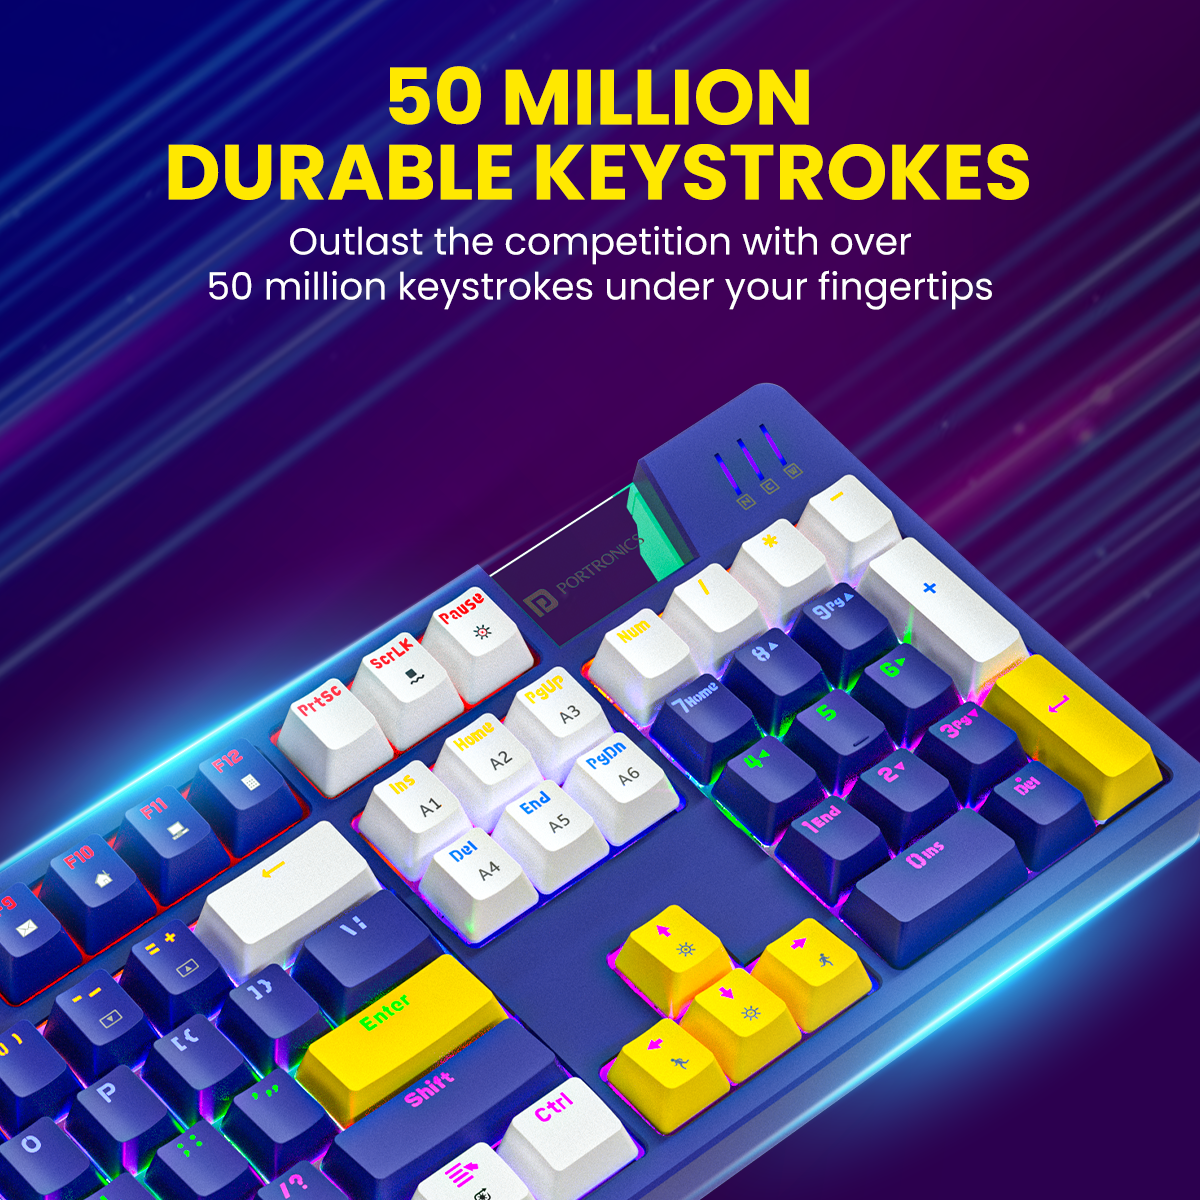 Portronics K2- Blue Gaming wired mechanical Keyboard with 50million durable keystrokes